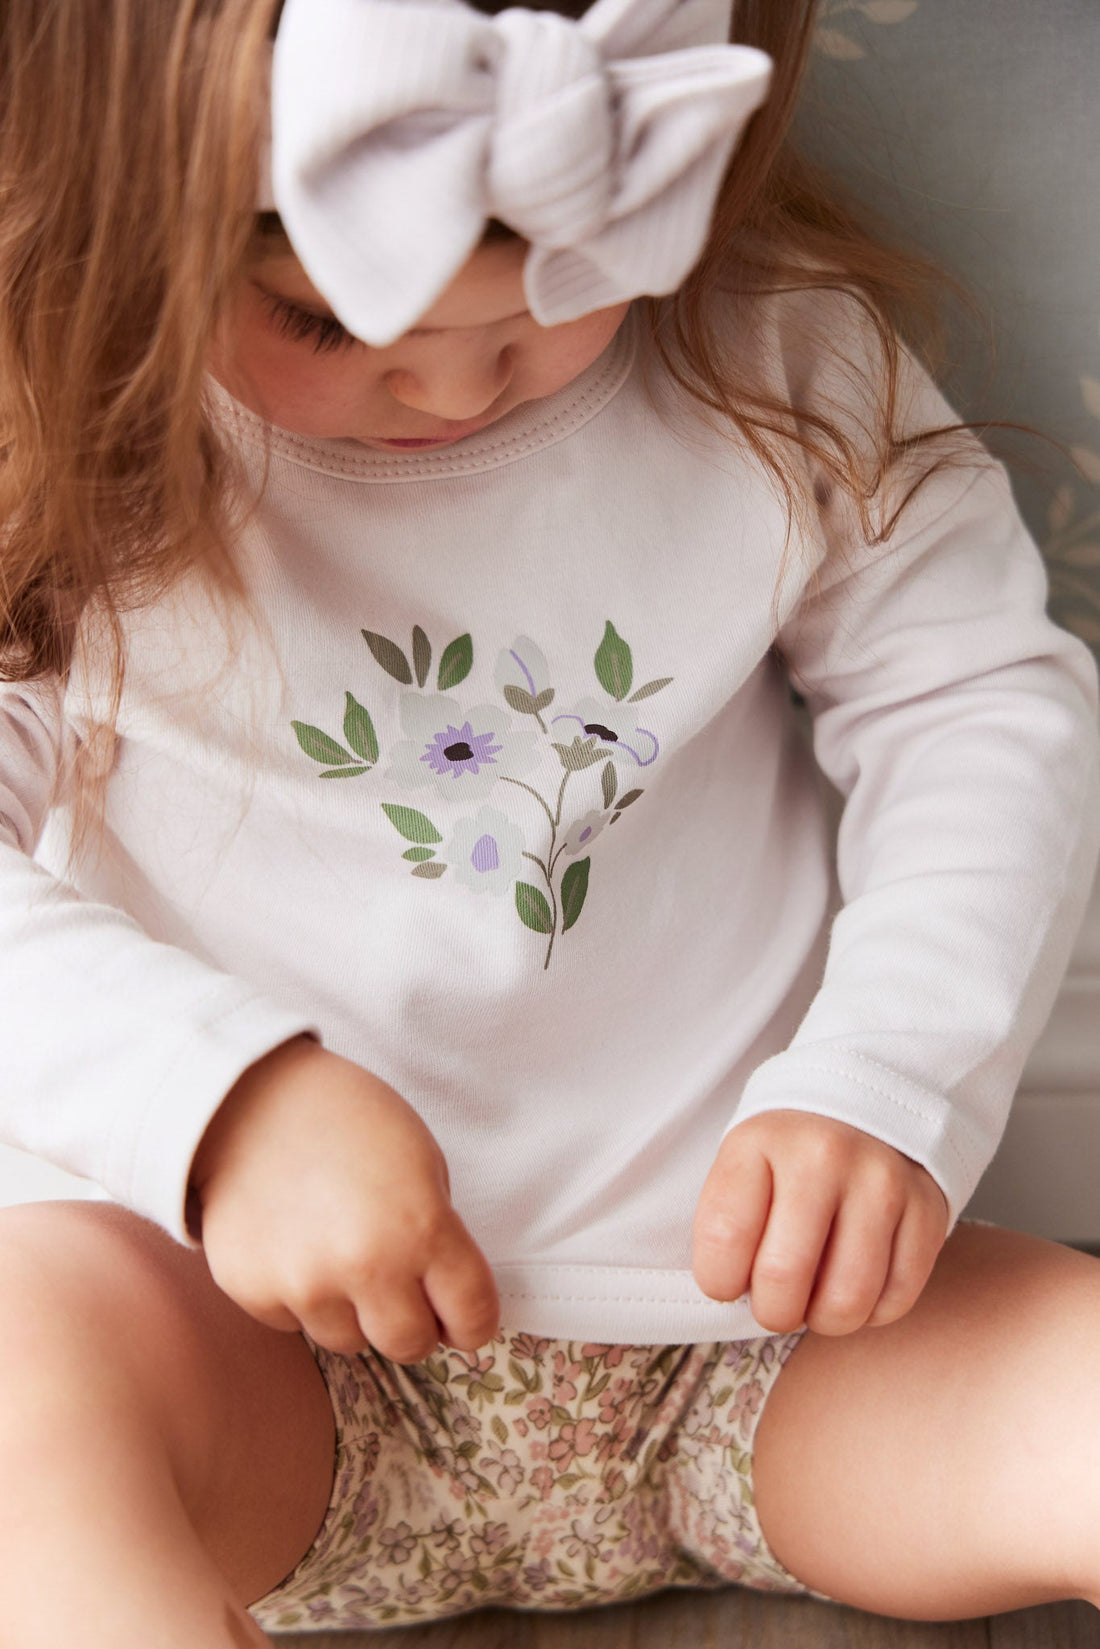 Pima Cotton Marley Long Sleeve Top - Luna Childrens Top from Jamie Kay USA